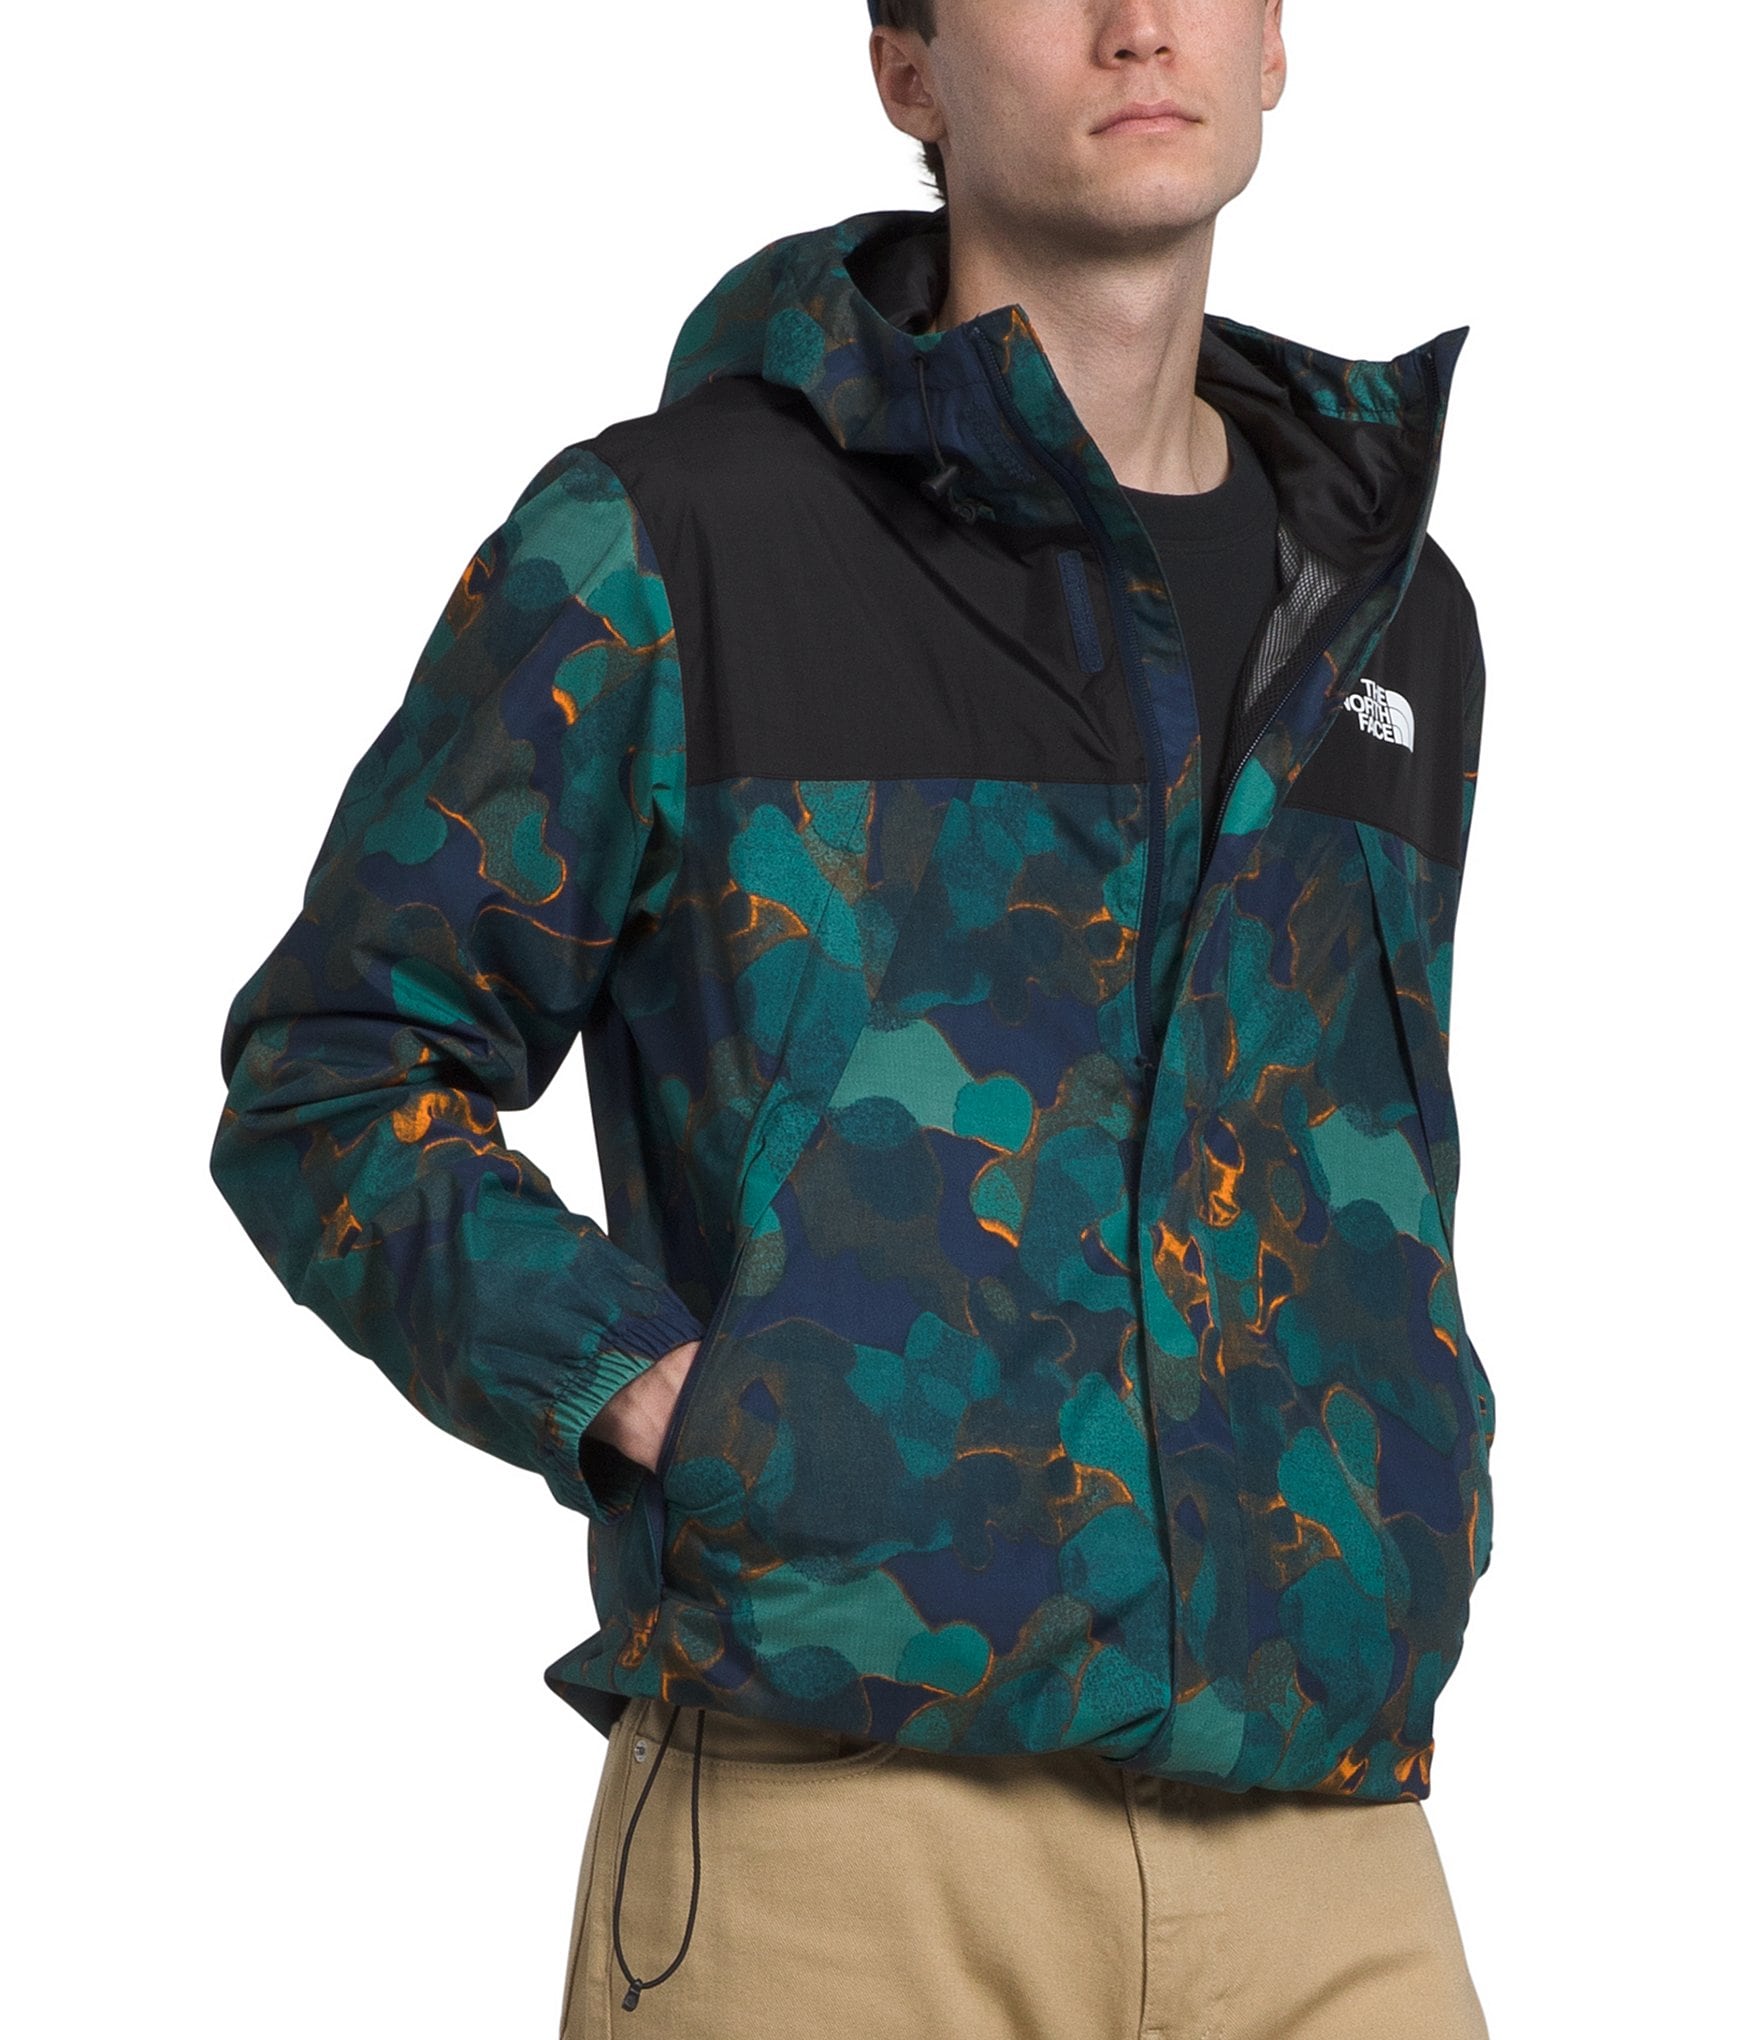  THE NORTH FACE Baby North Down Hooded Jacket, Cameo